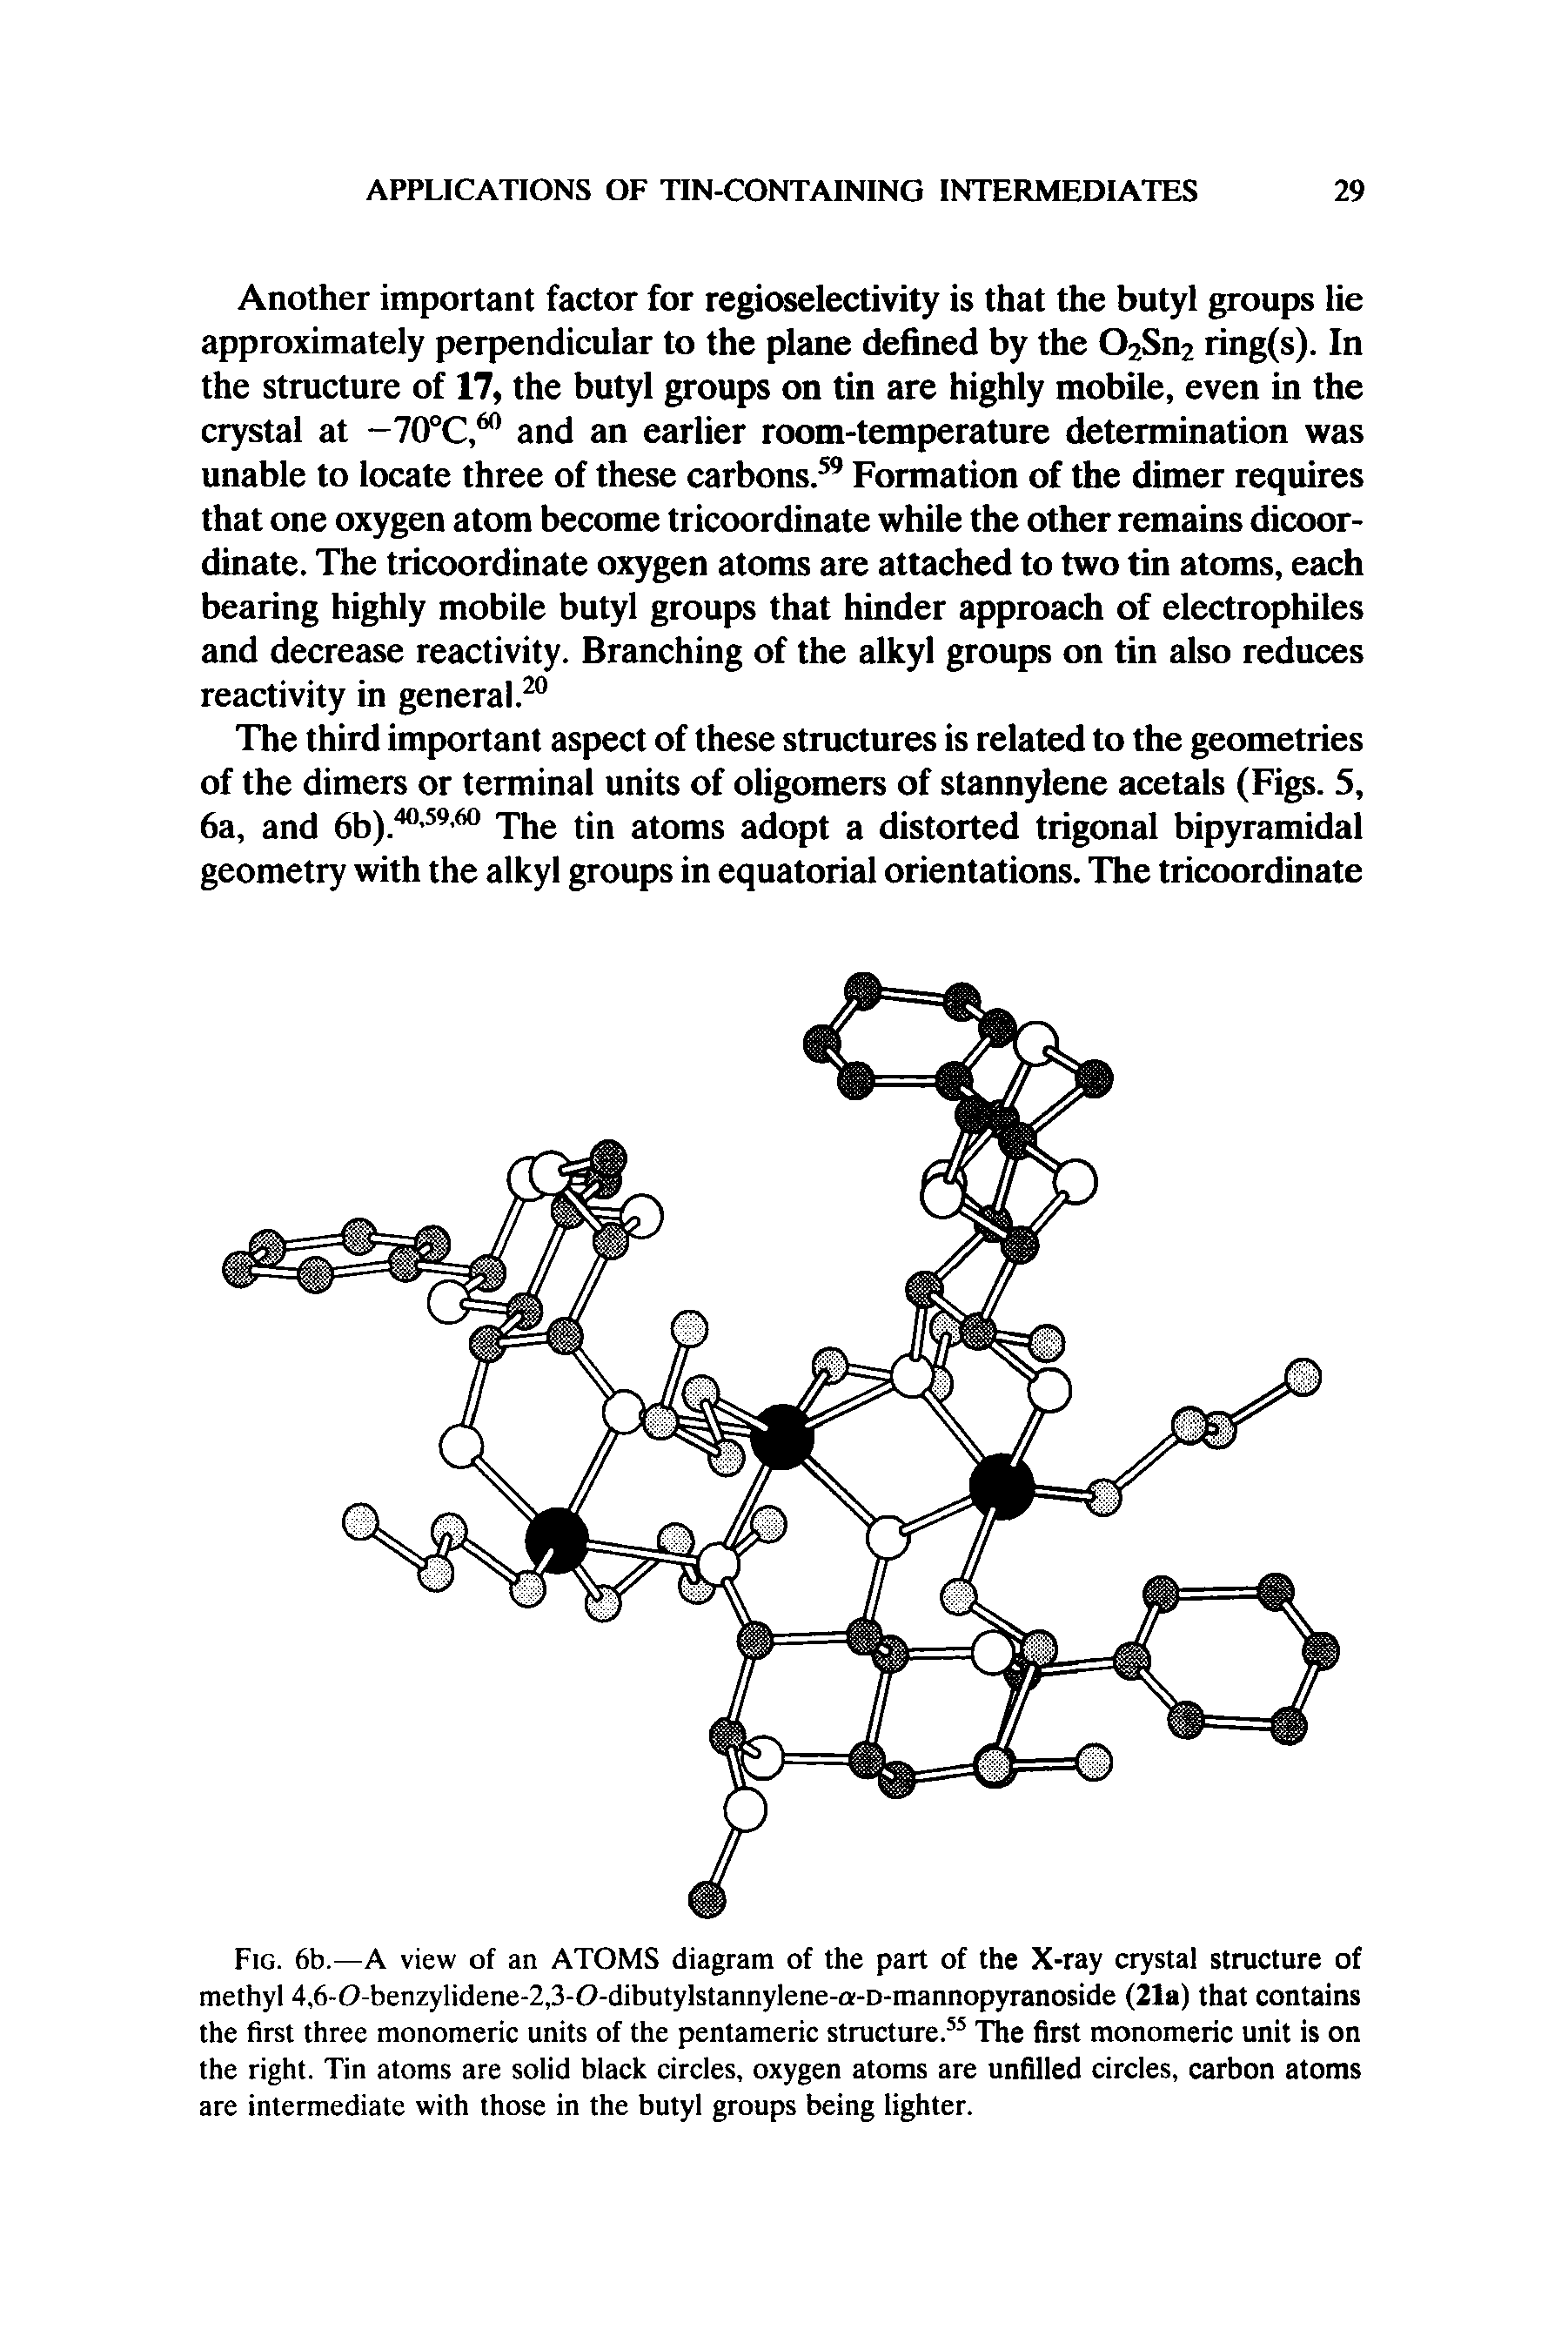 Fig. 6b.—A view of an ATOMS diagram of the part of the X-ray crystal structure of methyl 4,6-0-benzylidene-2,3-0-dibutylstannylene-a-D-mannopyranoside (21a) that contains the first three monomeric units of the pentameric structure.55 The first monomeric unit is on the right. Tin atoms are solid black circles, oxygen atoms are unfilled circles, carbon atoms are intermediate with those in the butyl groups being lighter.